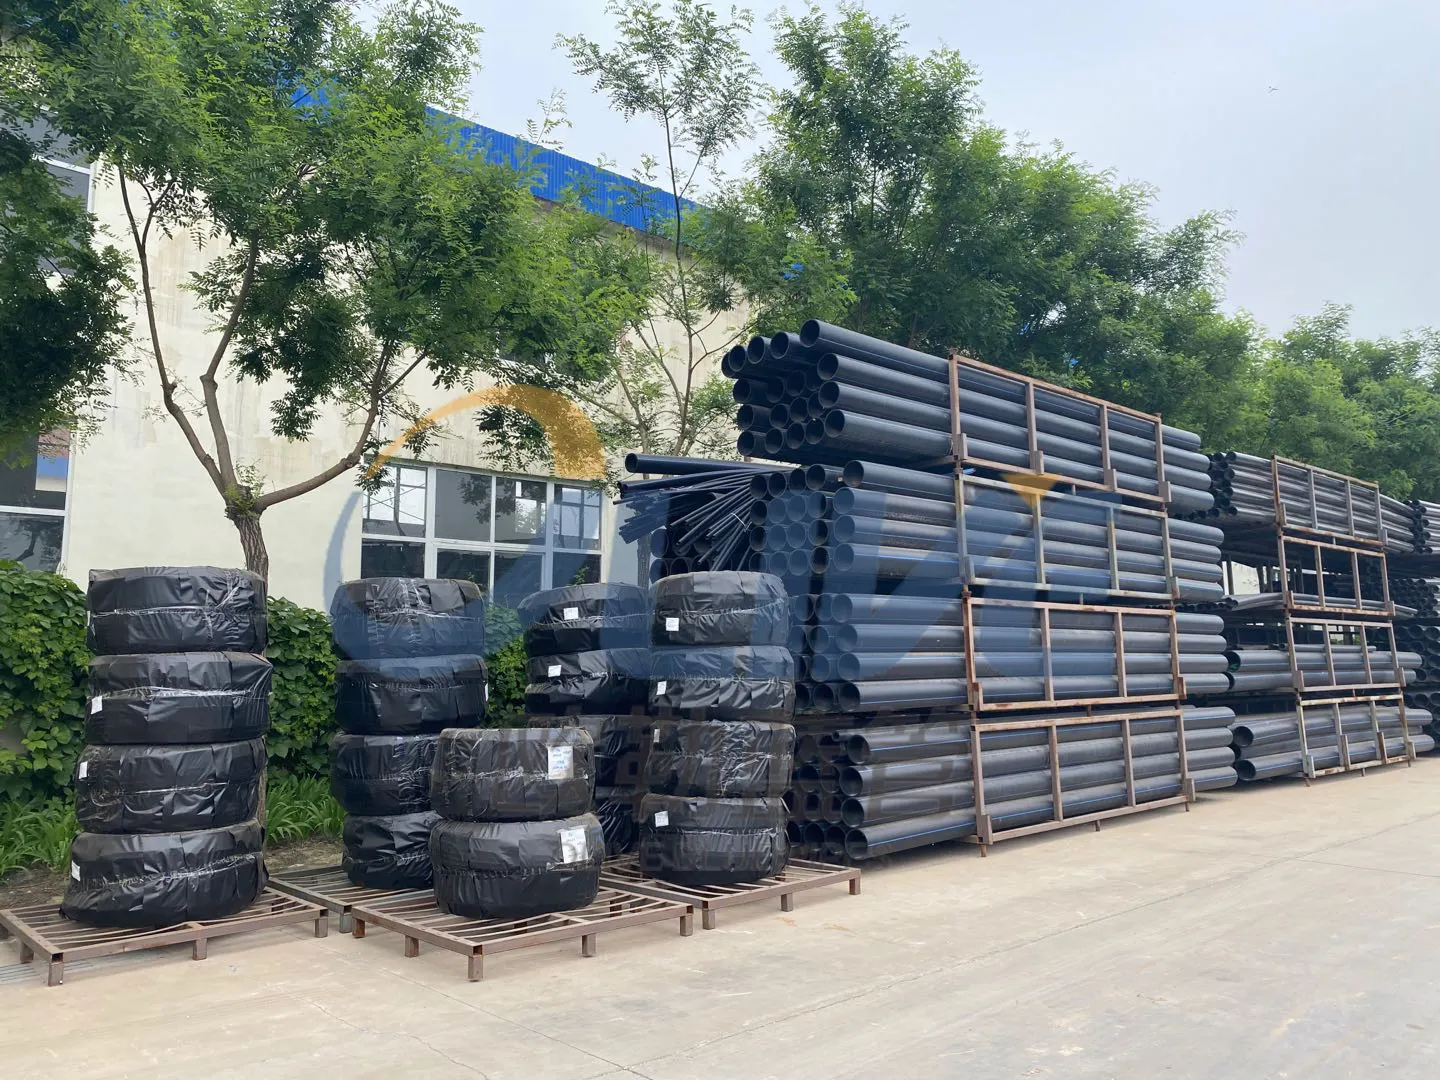 400mm 15 20 24 25 30 36 48 inch large diameter hdpe pipe prices 500mm pipe 400mm irrigation pe hd tube pipe